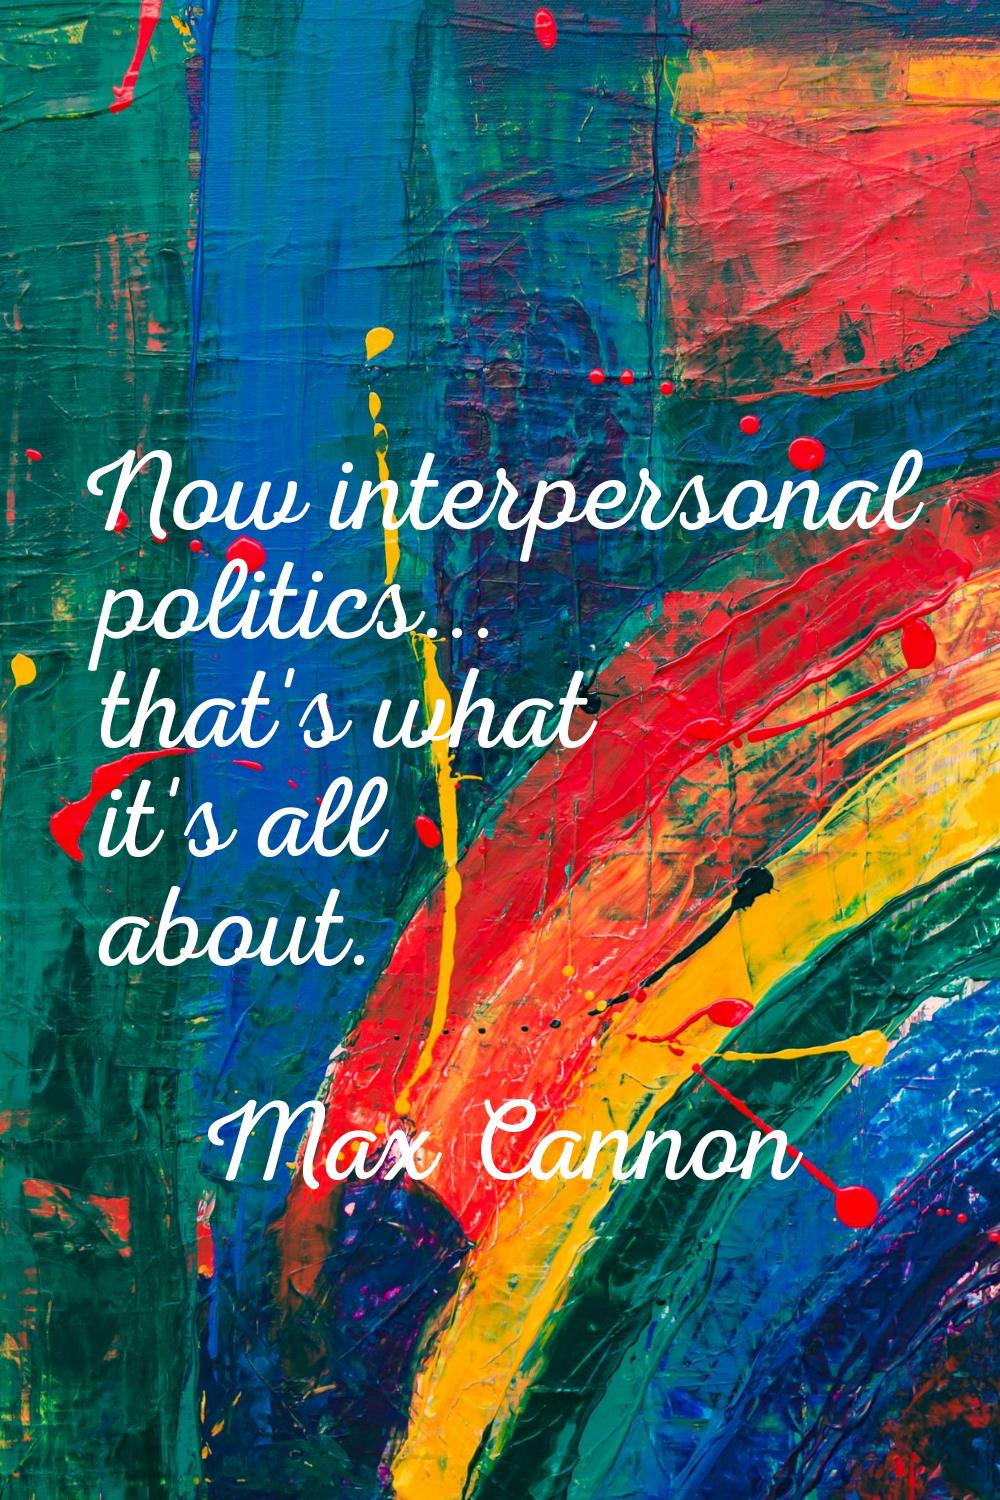 Now interpersonal politics... that's what it's all about.